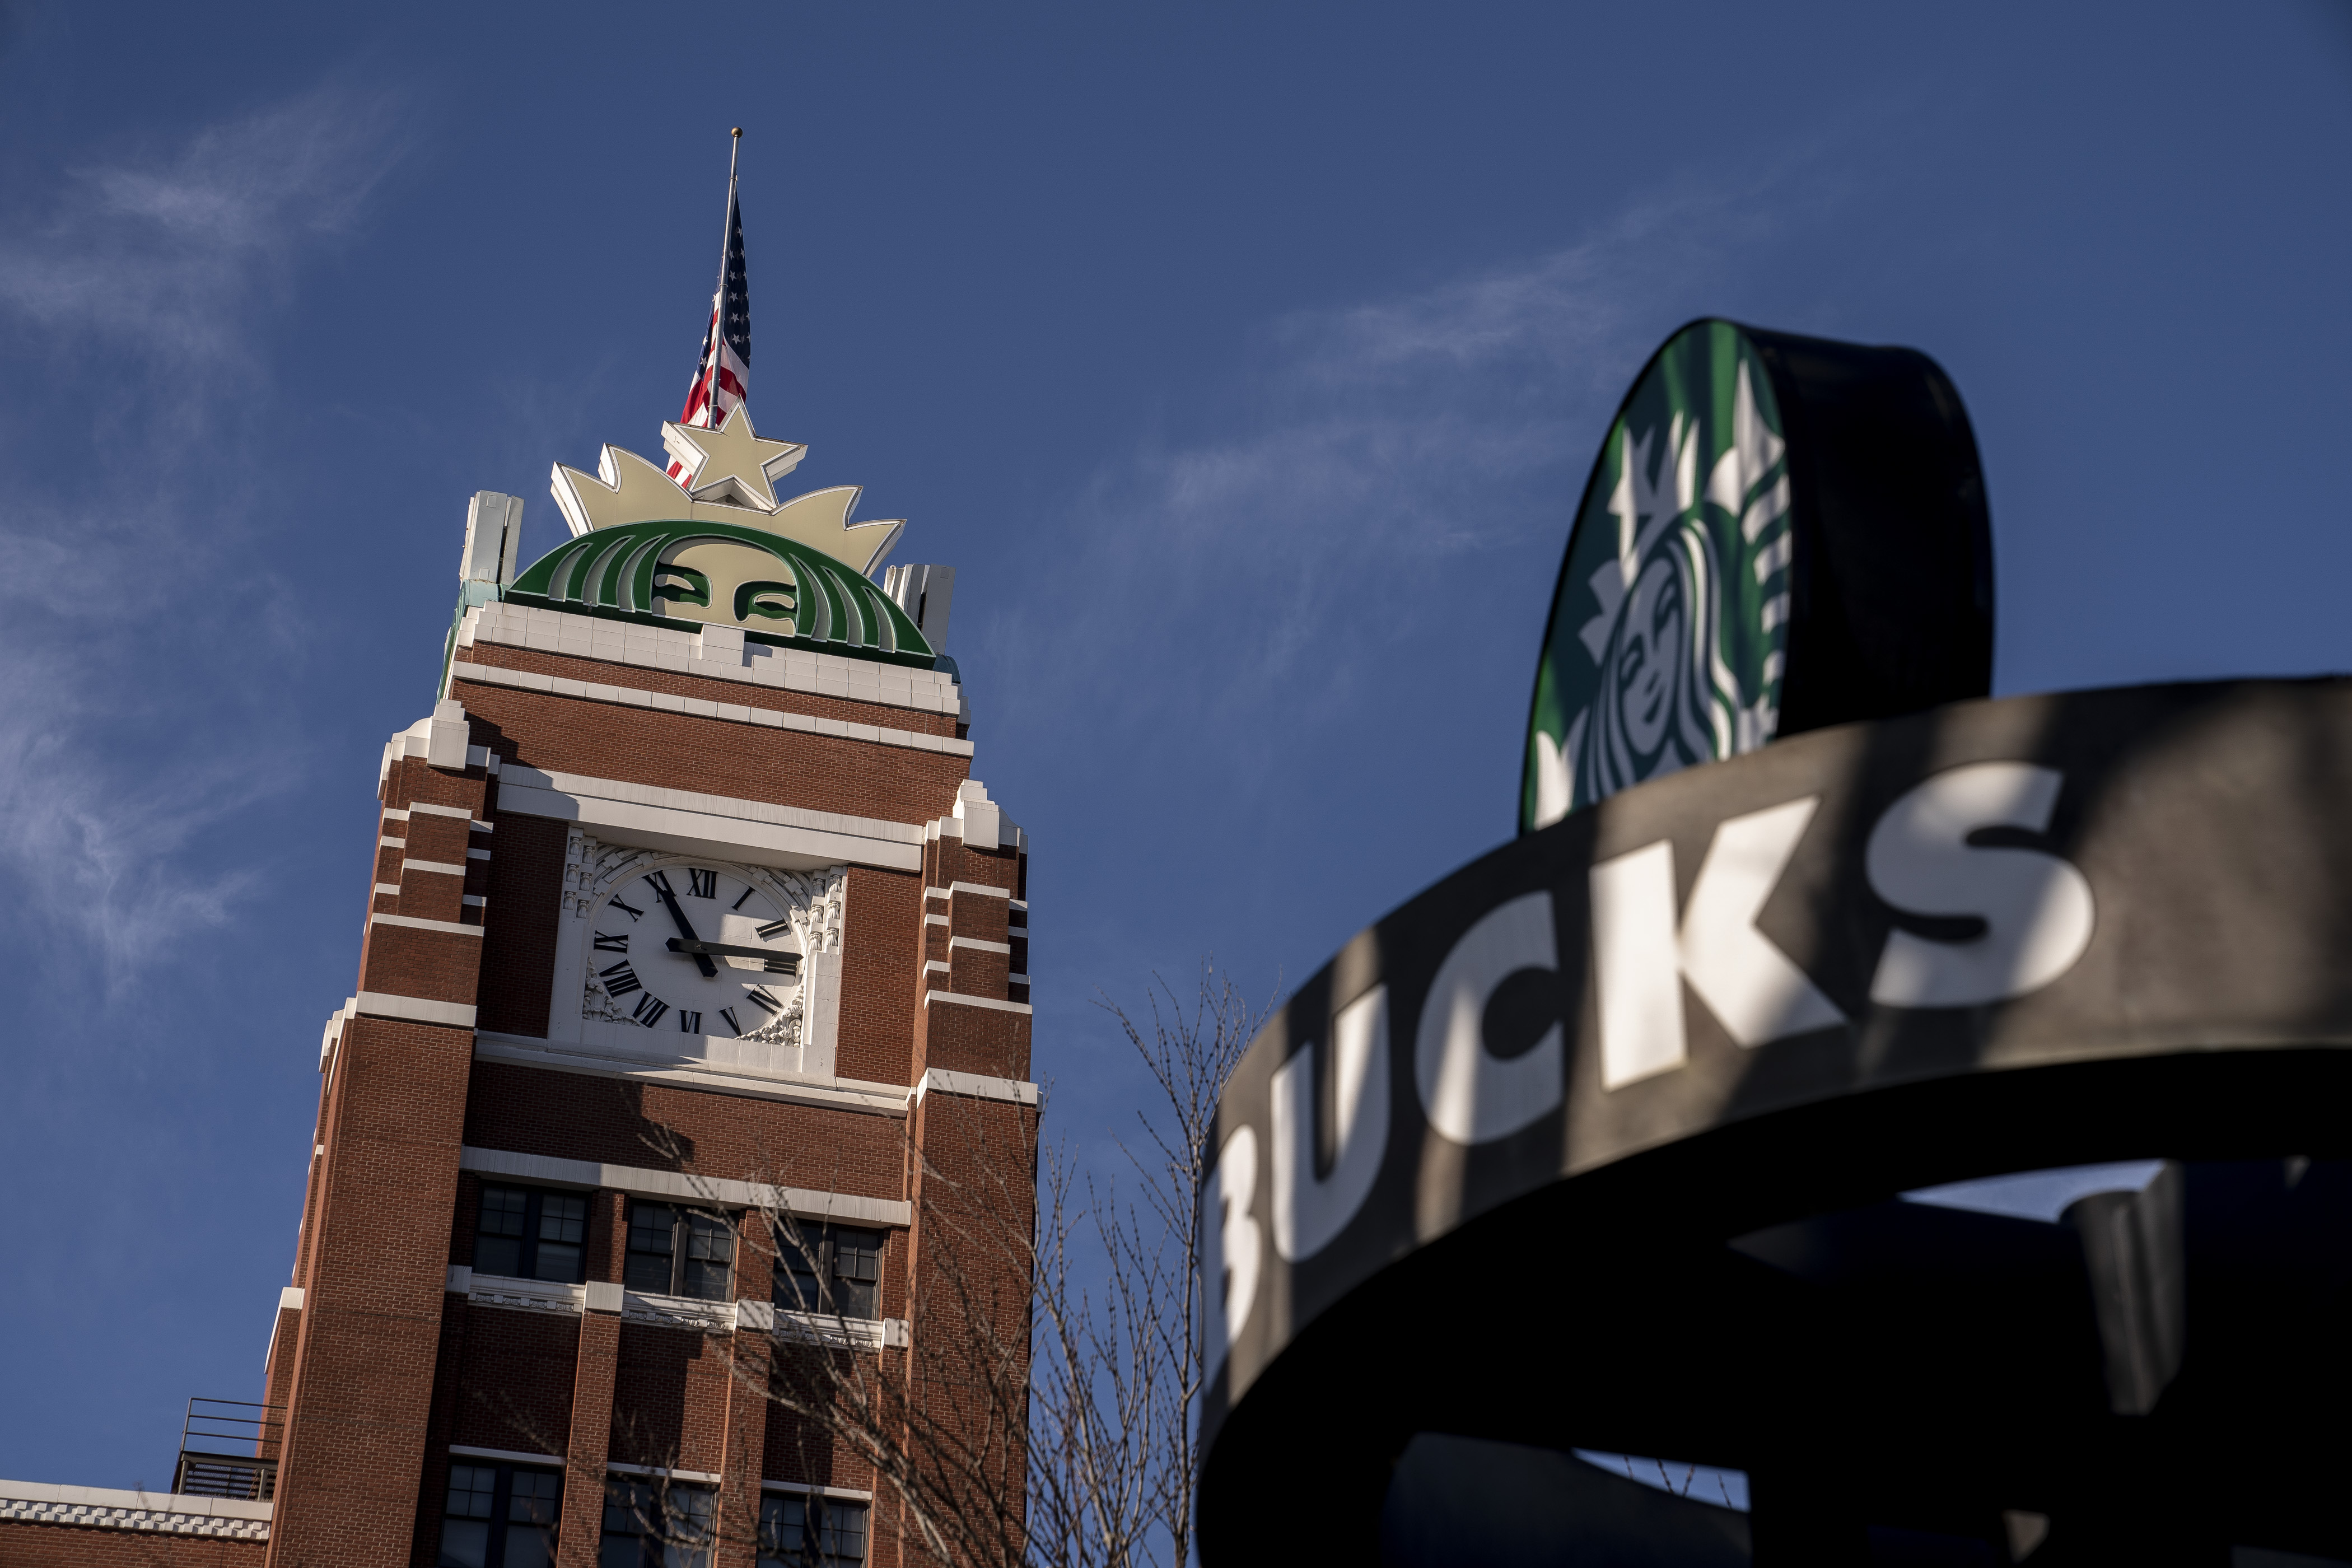 The top of a clocktower with Starbucks iconography; closer, there is a Starbucks sign